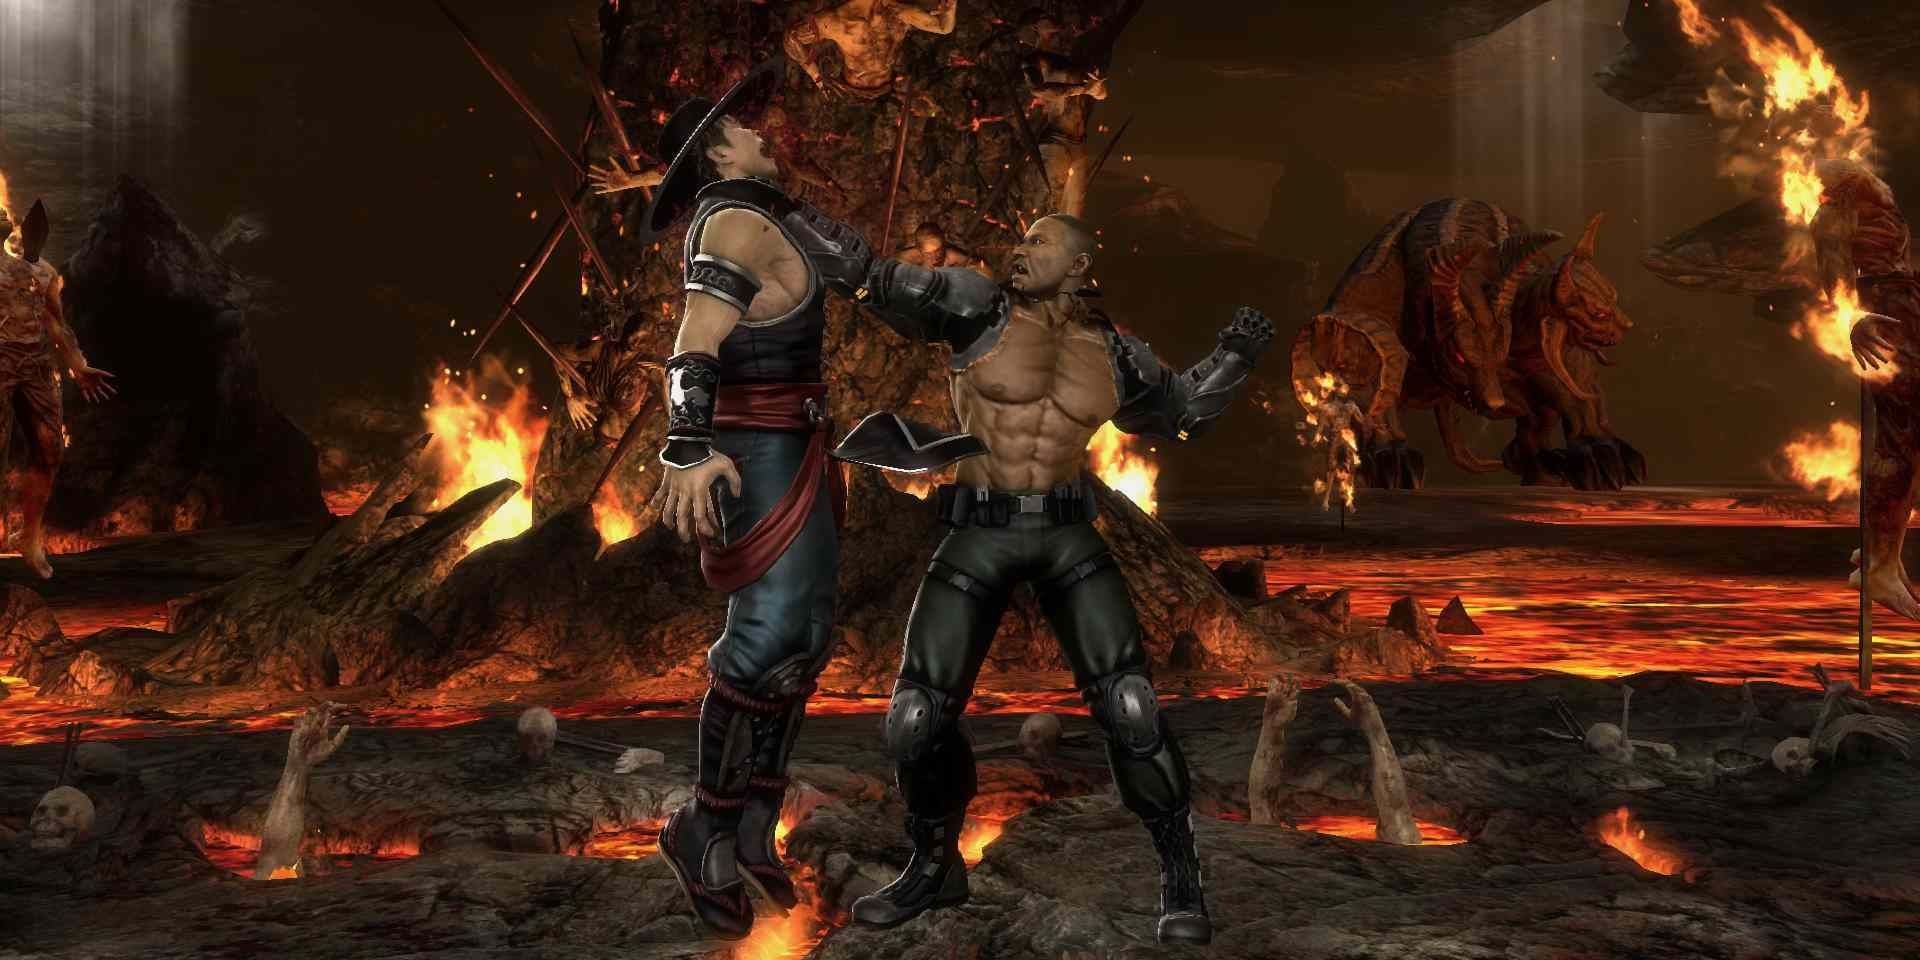 Jax holding Kung Lao by his throat.